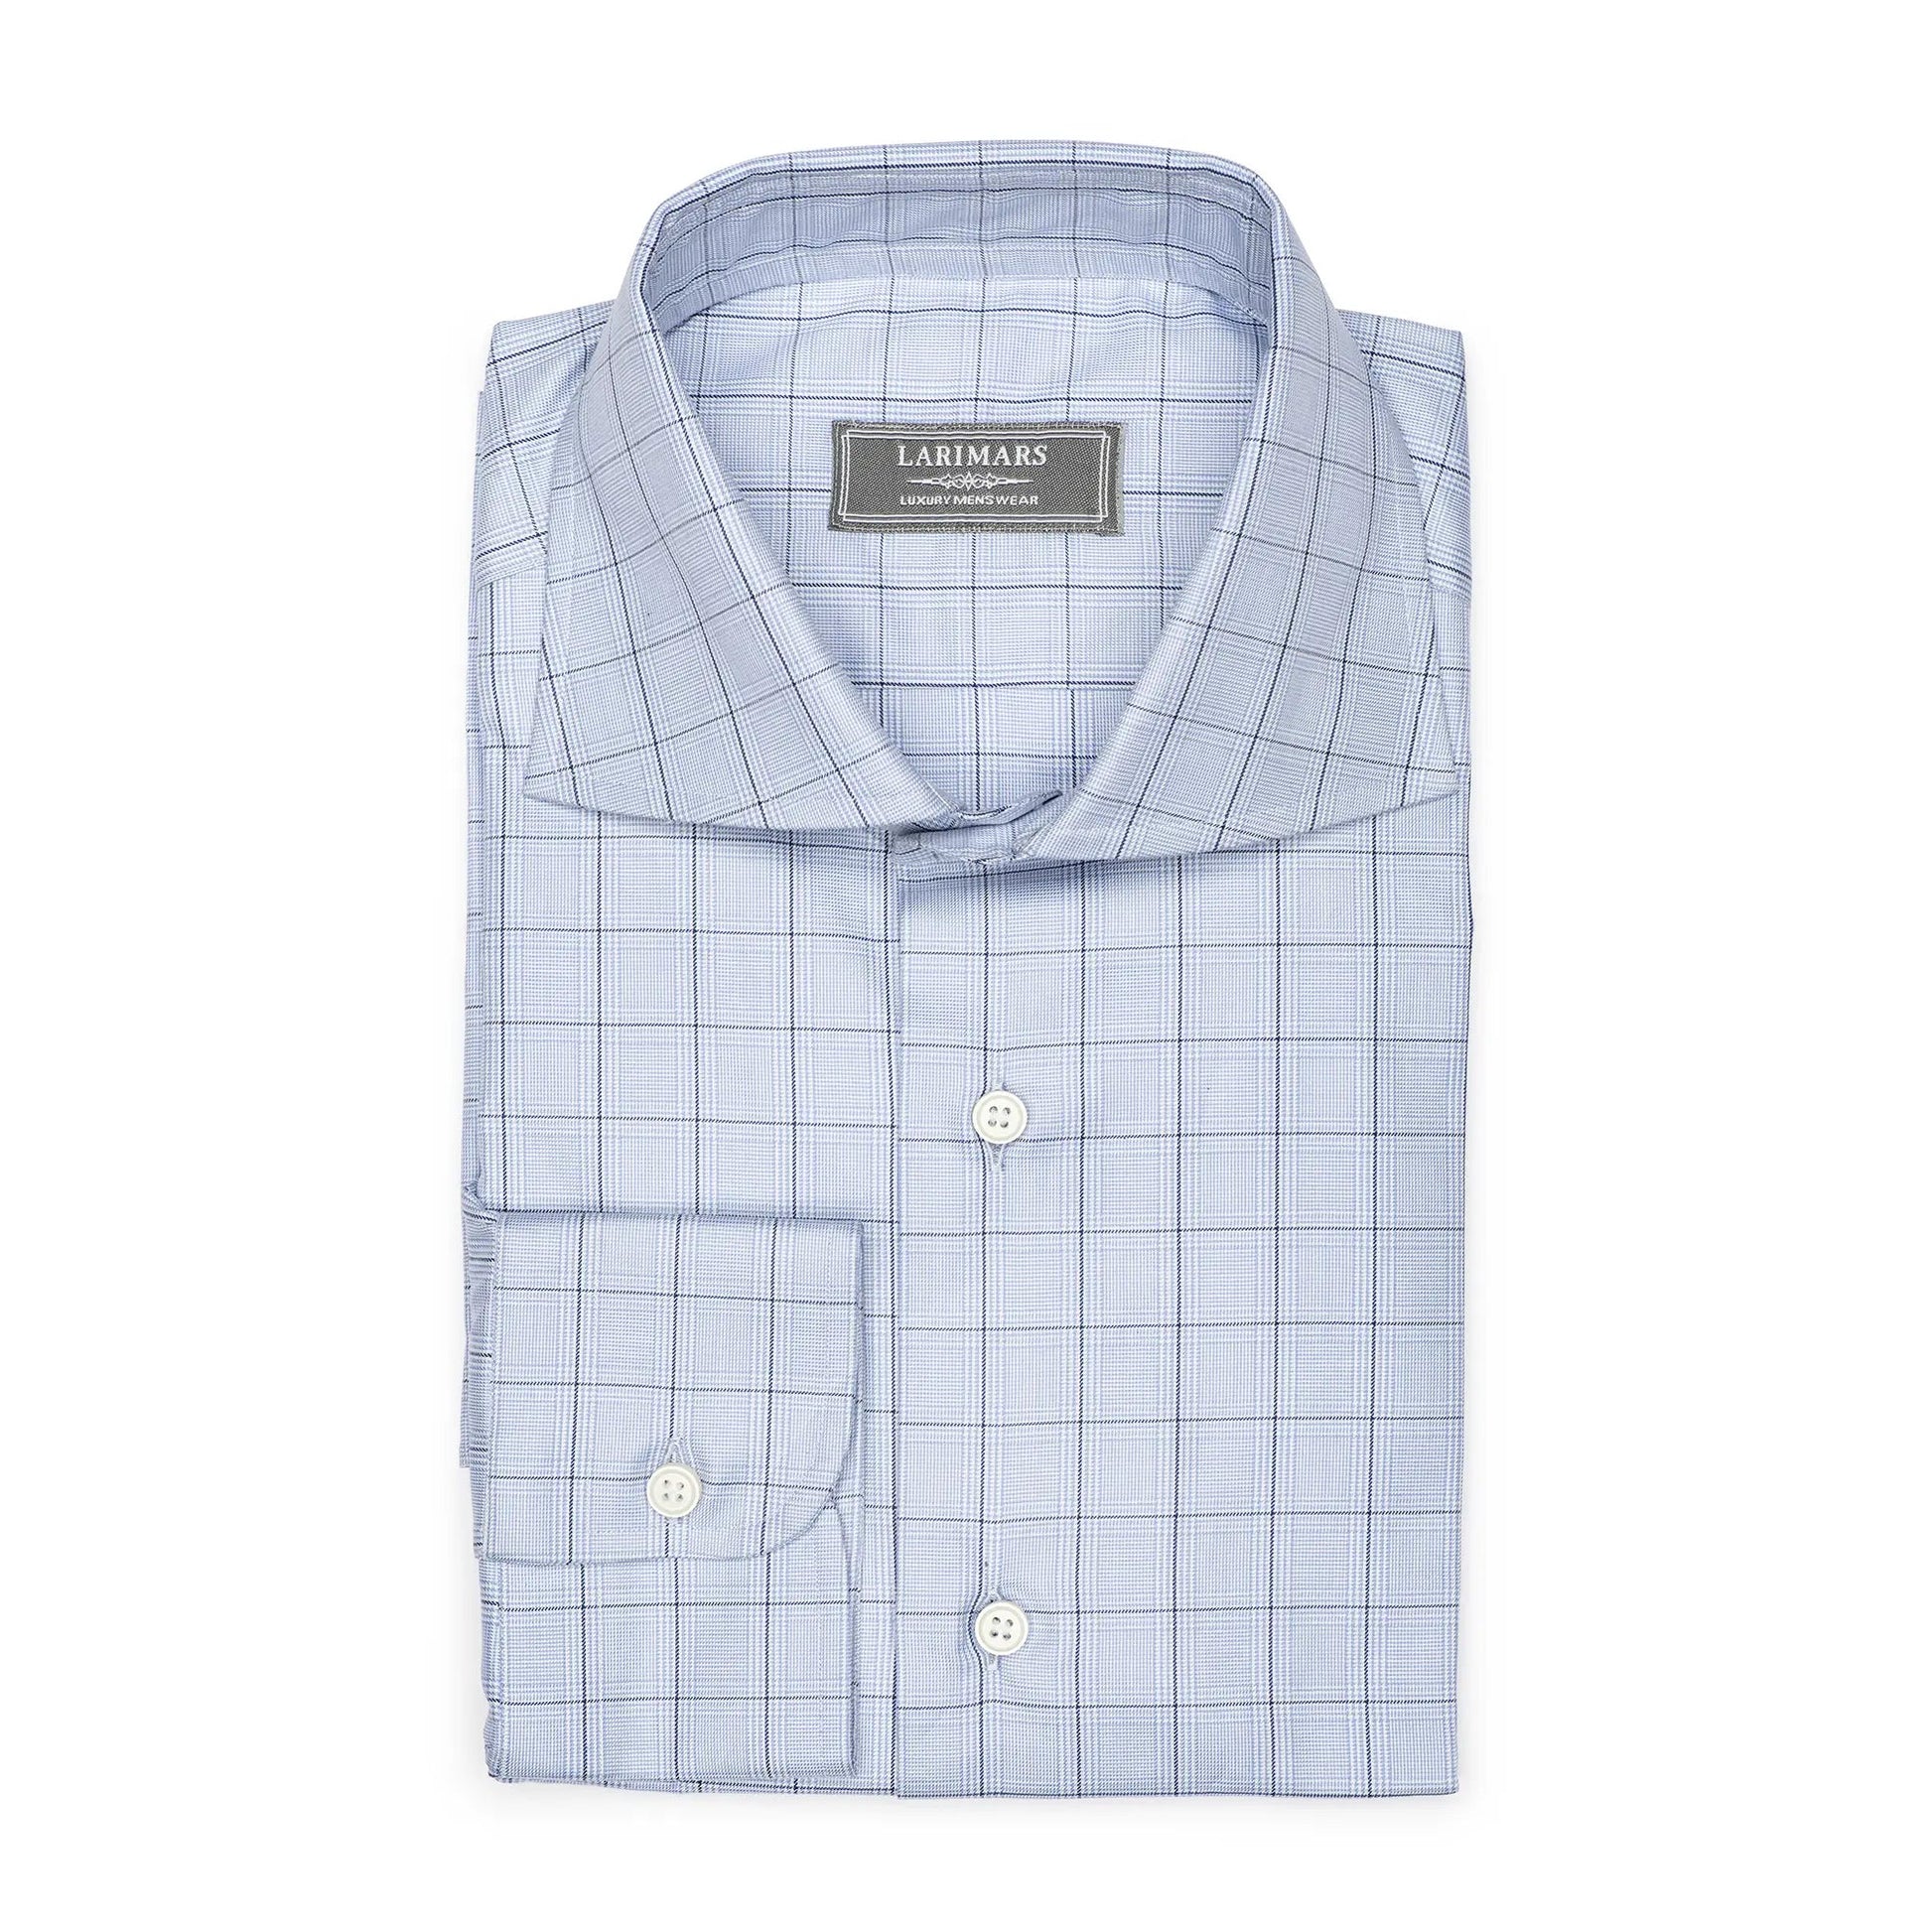 Navy & Blue Dobby - Larimars Clothing Men's Formal and casual wear shirts